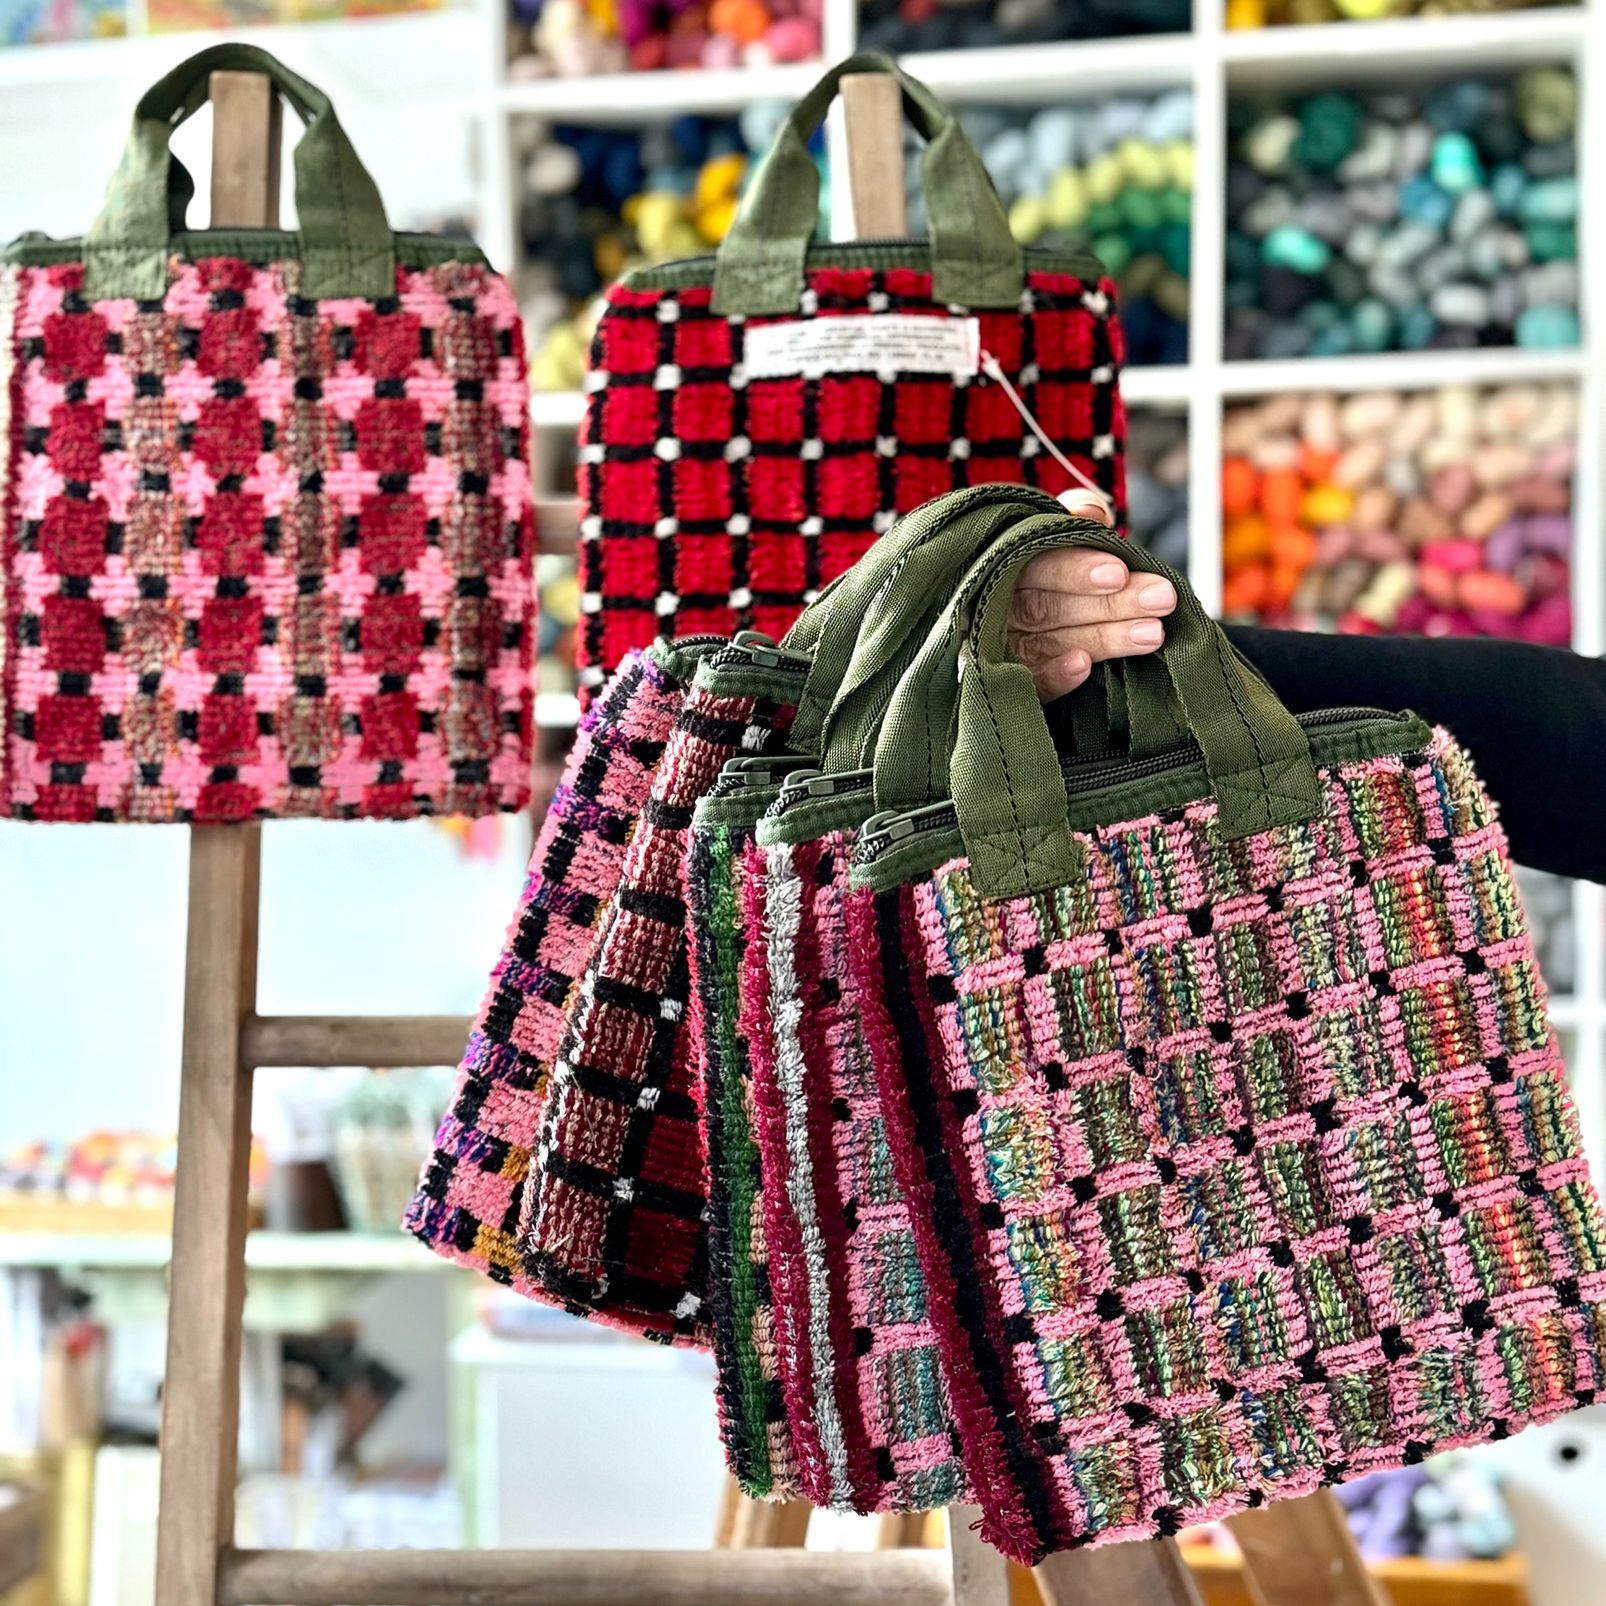 Fabulous Fabric Totes Are Here Again!